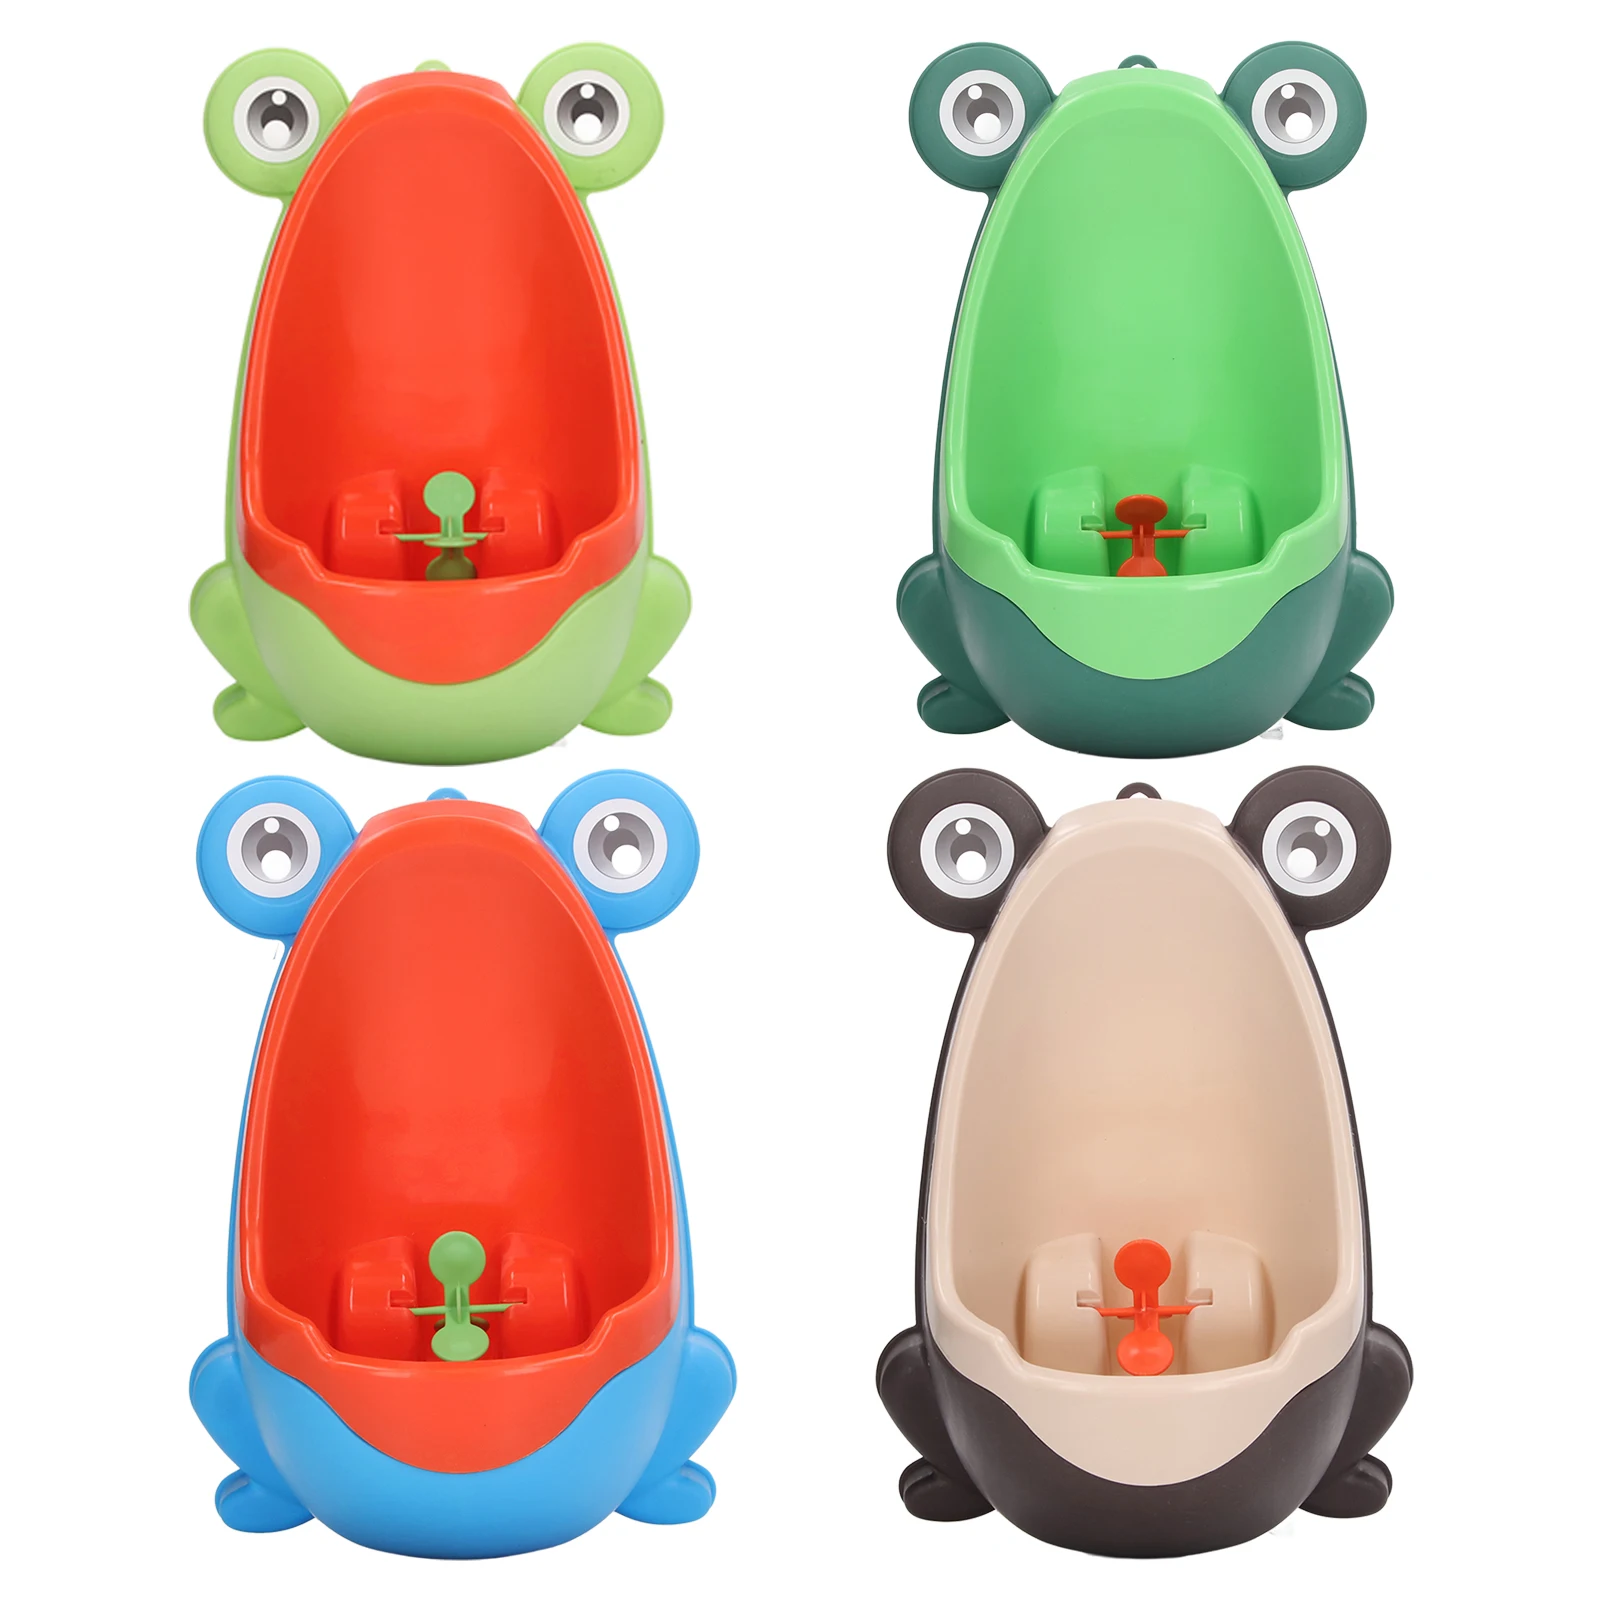 baby boys standing potty shape wall mounted urinals toilet training children stand vertical urinal potty Baby Boys Standing Potty Shape Wall-Mounted Urinals Toilet Training Children Stand Vertical Urinal Potty